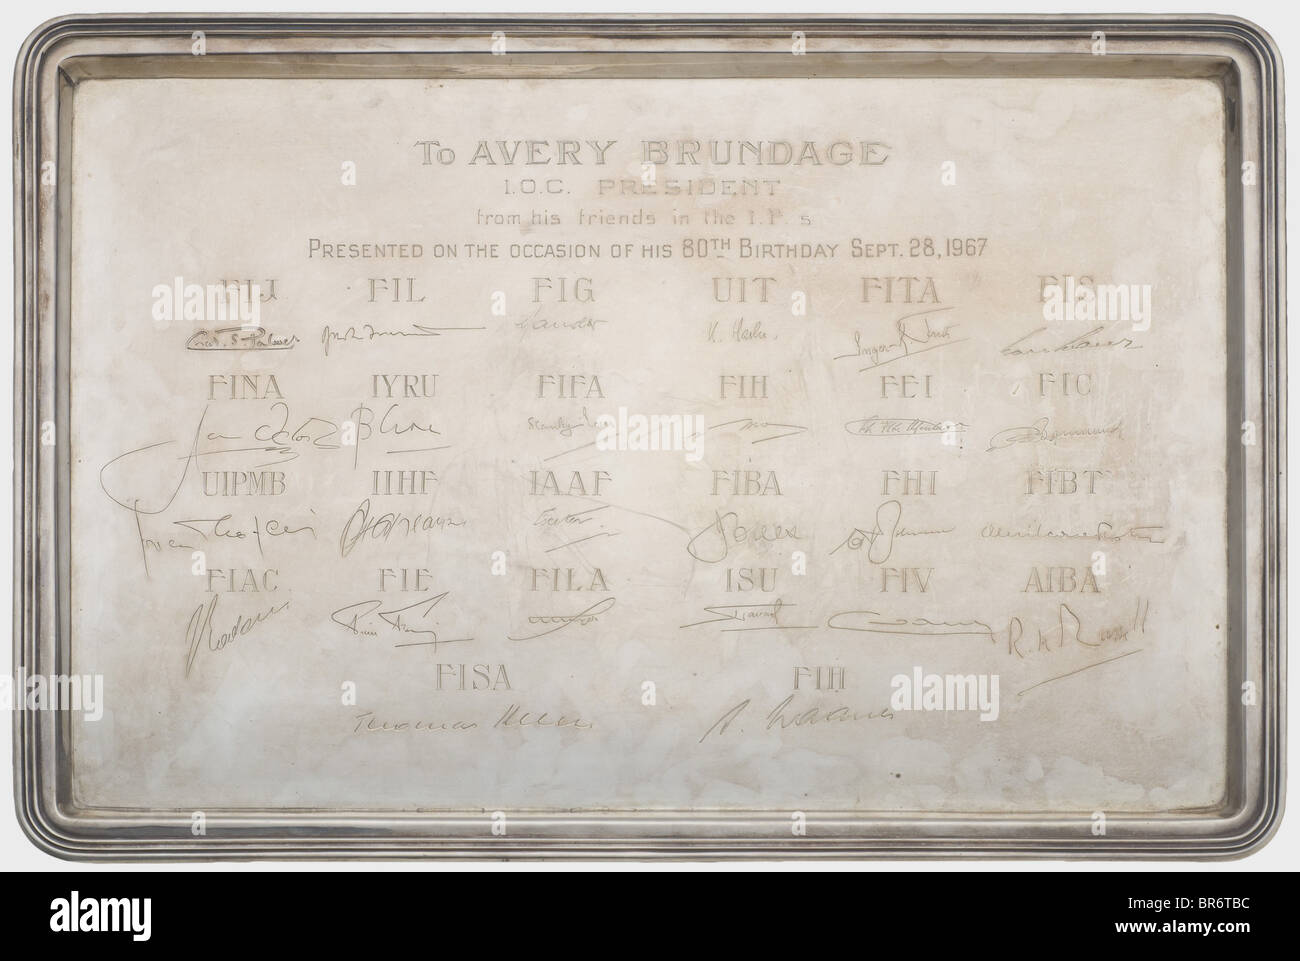 Avery Brundage (1887 - 1975) - a silver gift platter given by the presidents of the various international sports federations on the occasion of his 80th birthday in 1967., Silver, rectangular shape, hallmark and jeweller's mark '800' and 'Beard Montreux'. In the centre the dedication engraving 'To Avery Brundage I.O.C. President from his friends in the I.F.s presented on the occasion of his 80th birthday Sept. 28, 1967' and the 26 signatures of the presidents, among them Stanley Rous (FIFA), Antonio dos Reis Carnero (FIBA), Mrs. Inger Frith (FITA/archery), Rudy, Stock Photo